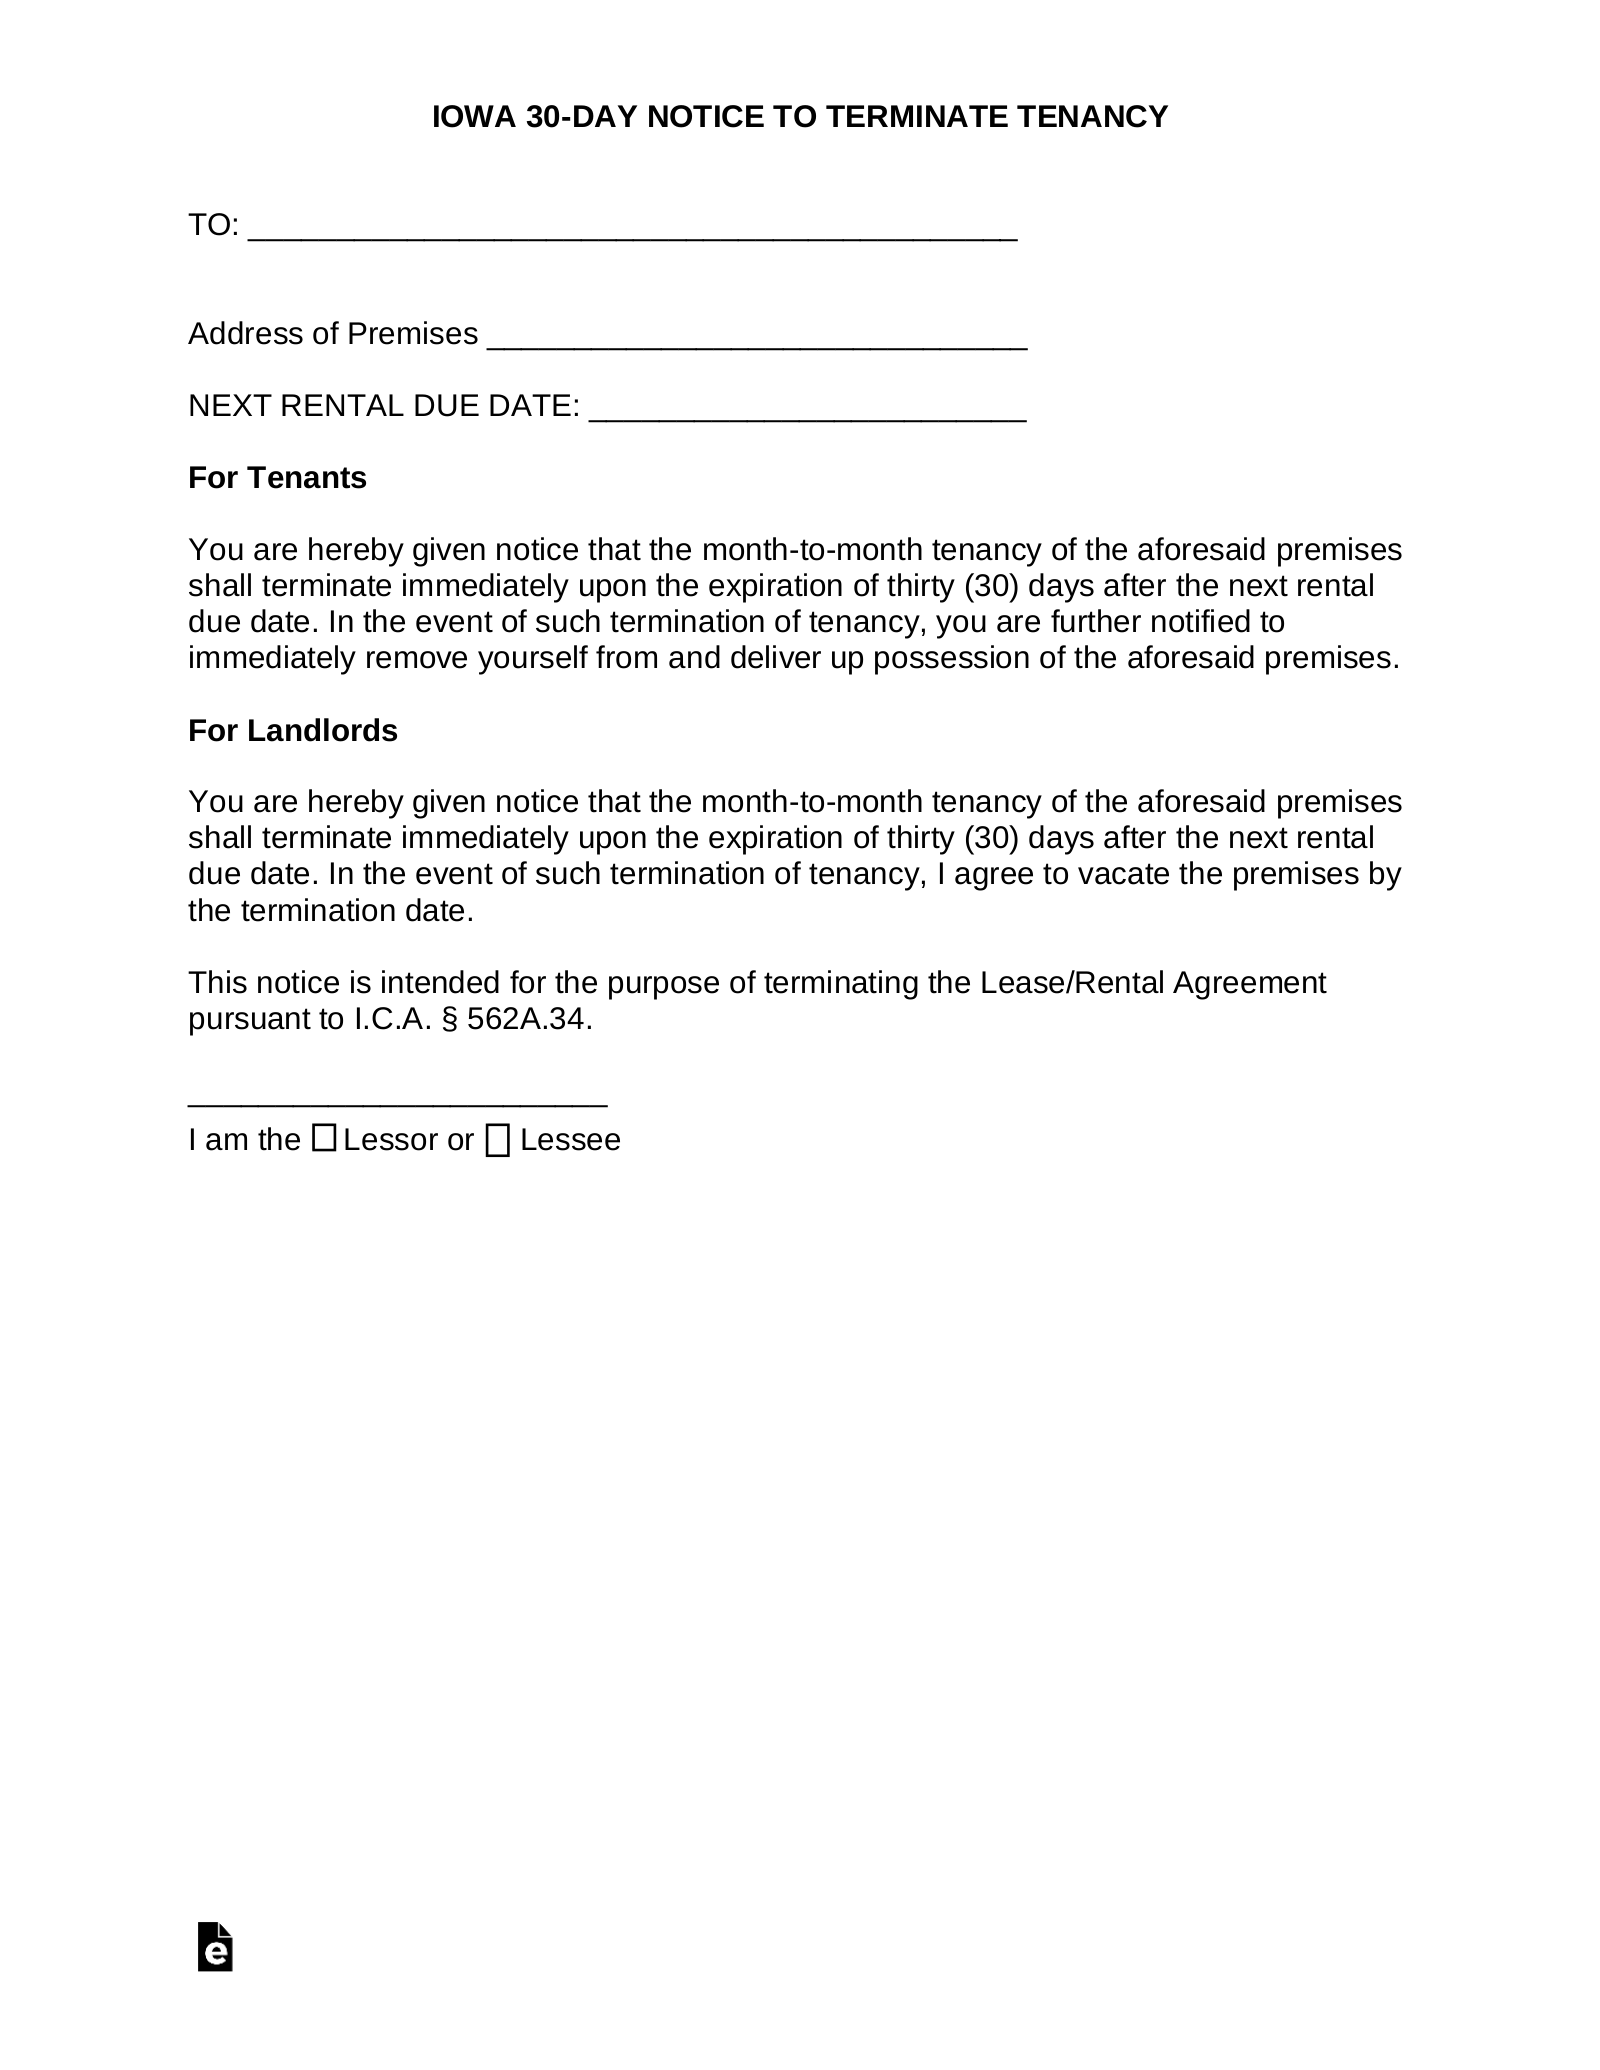 Warning Letter To Tenant Sample from eforms.com